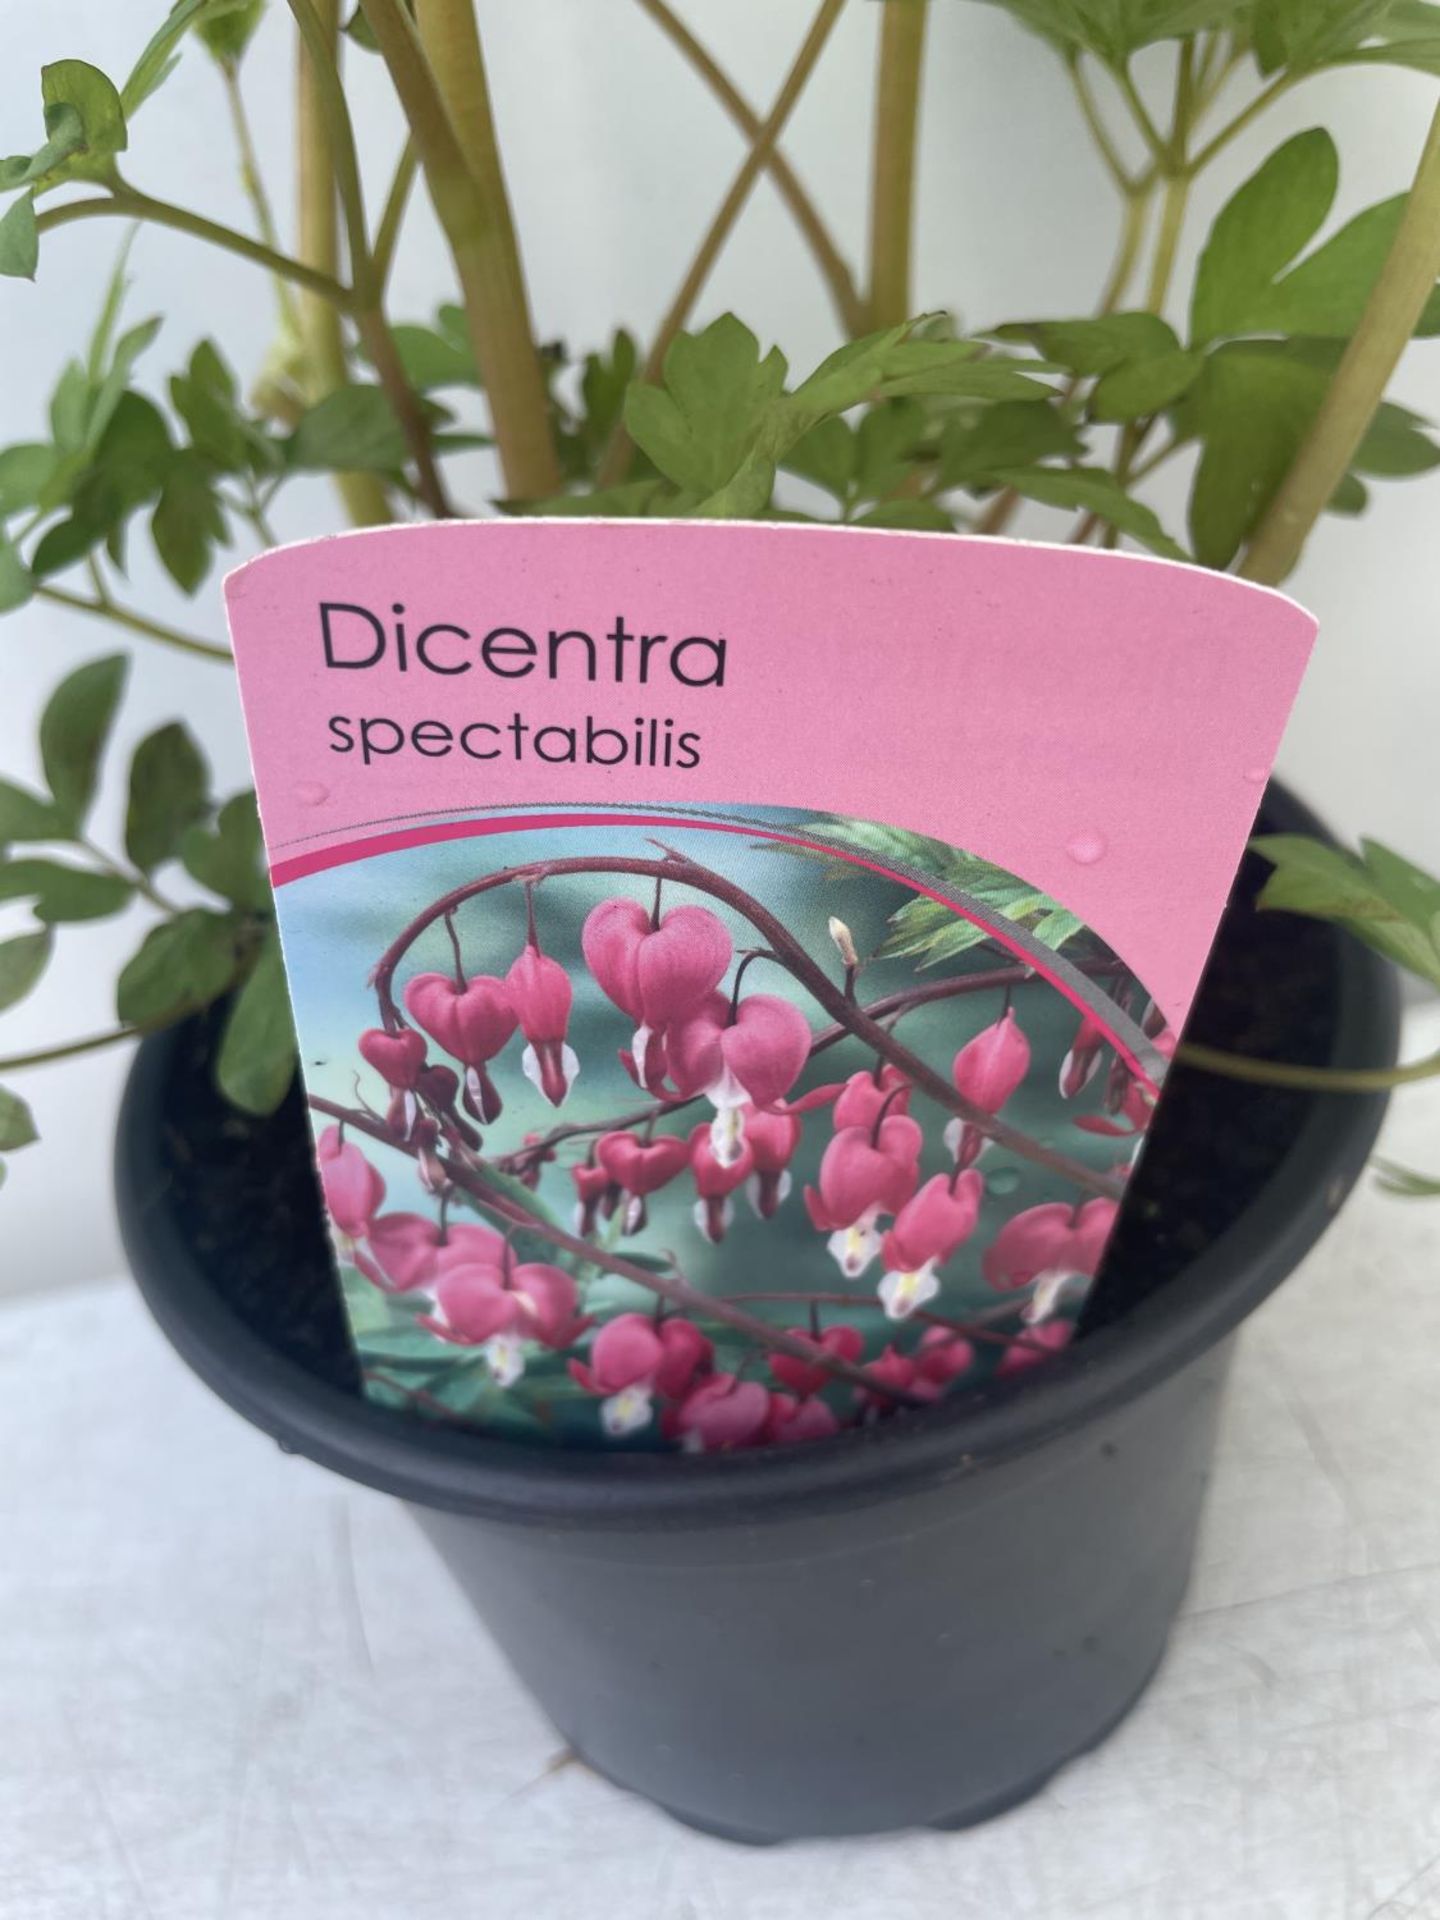 SIX DICENTRA SPECTABILIS BLEEDING HEART 50CM TALL TO BE SOLD FOR THE SIX PLUS VAT - Bild 4 aus 4